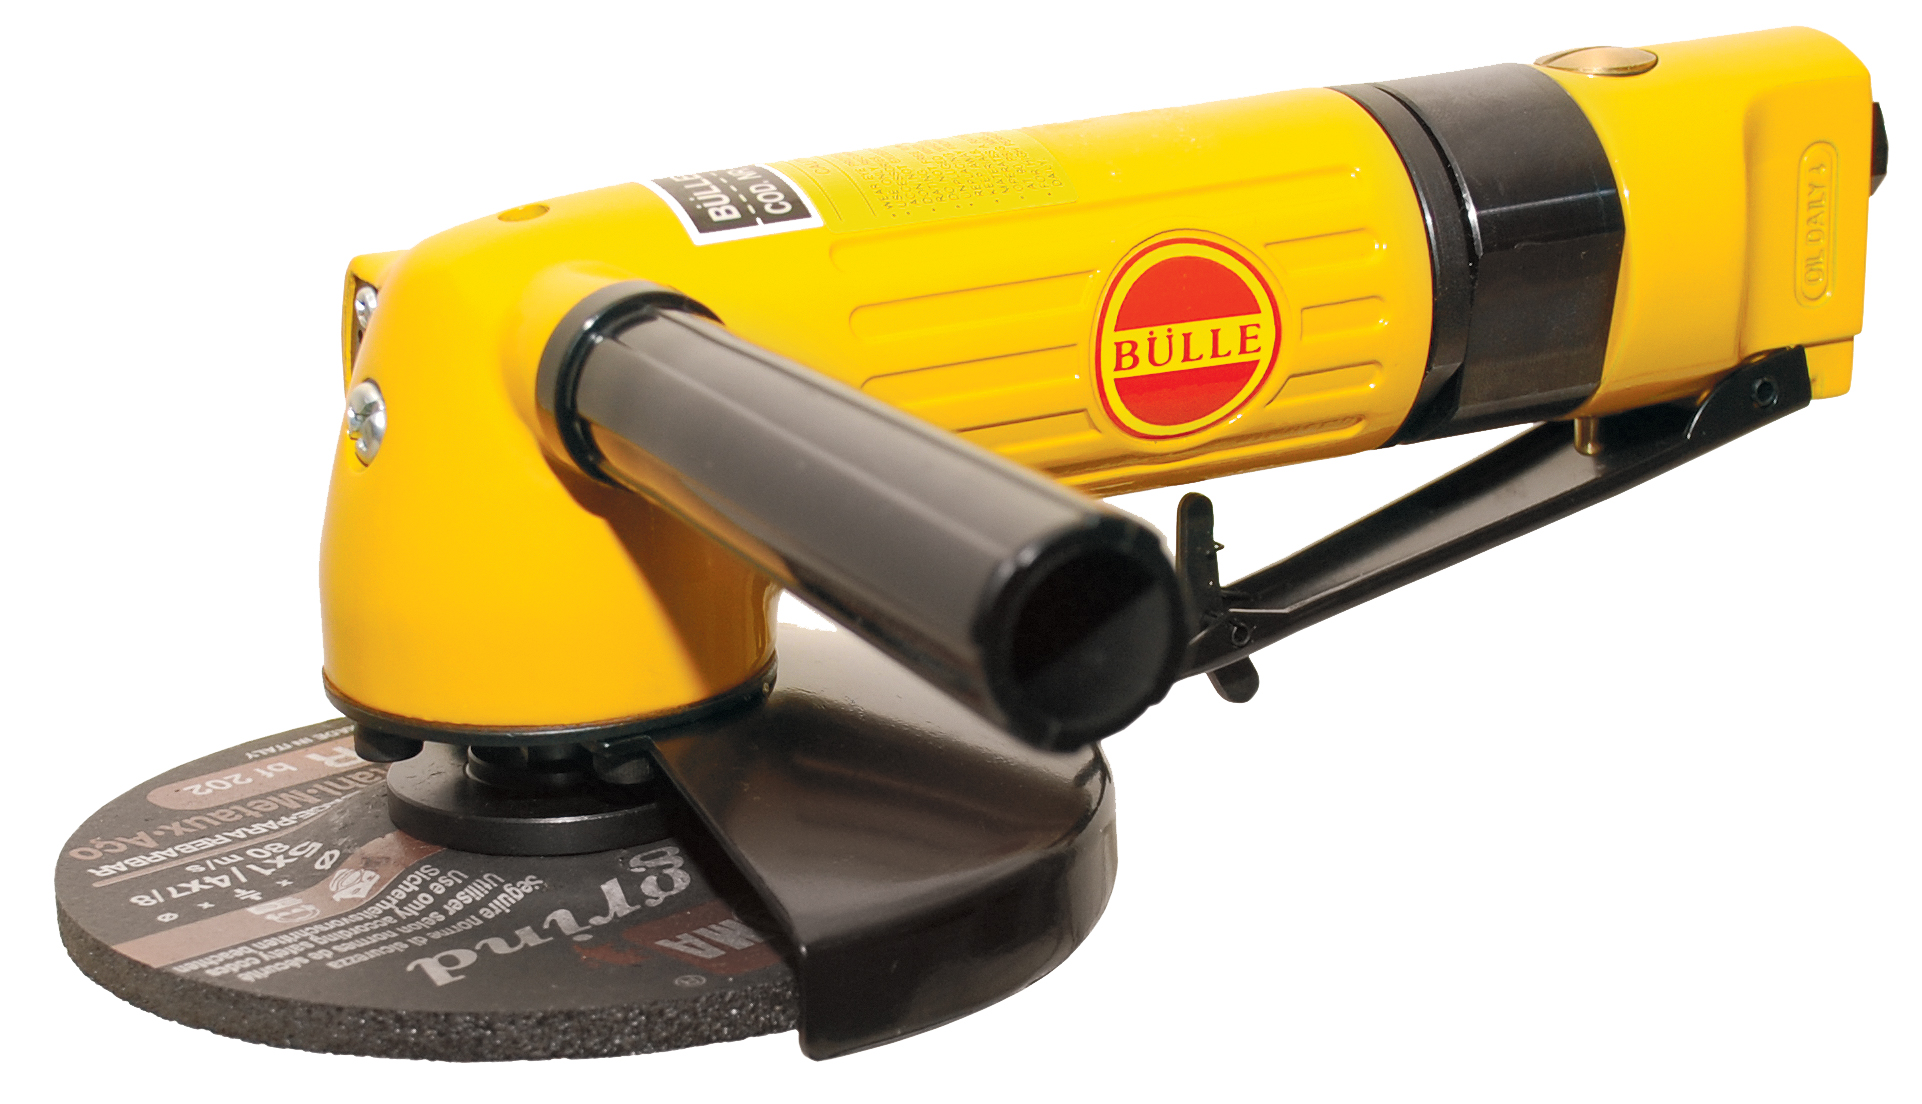 Air Angle Grinder 5" 11000rpm Bulle